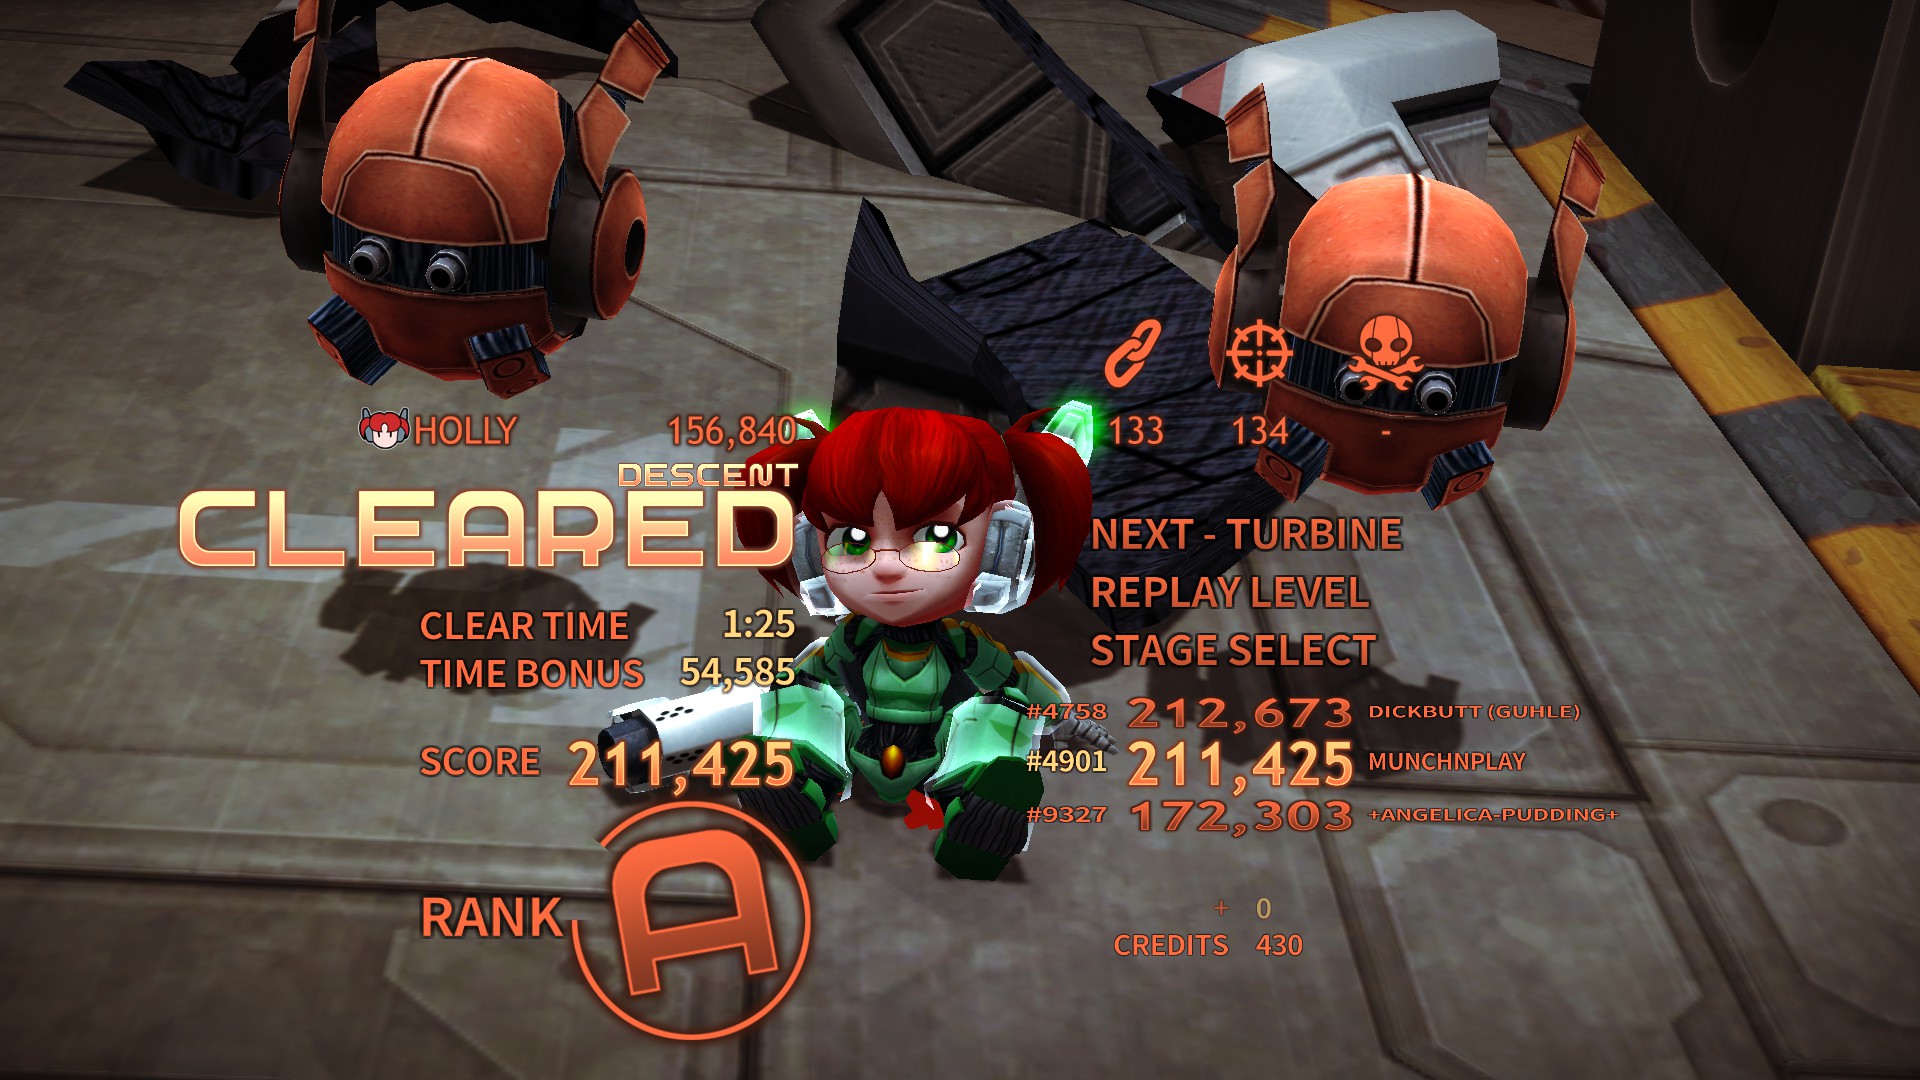 assault android cactus+ download free